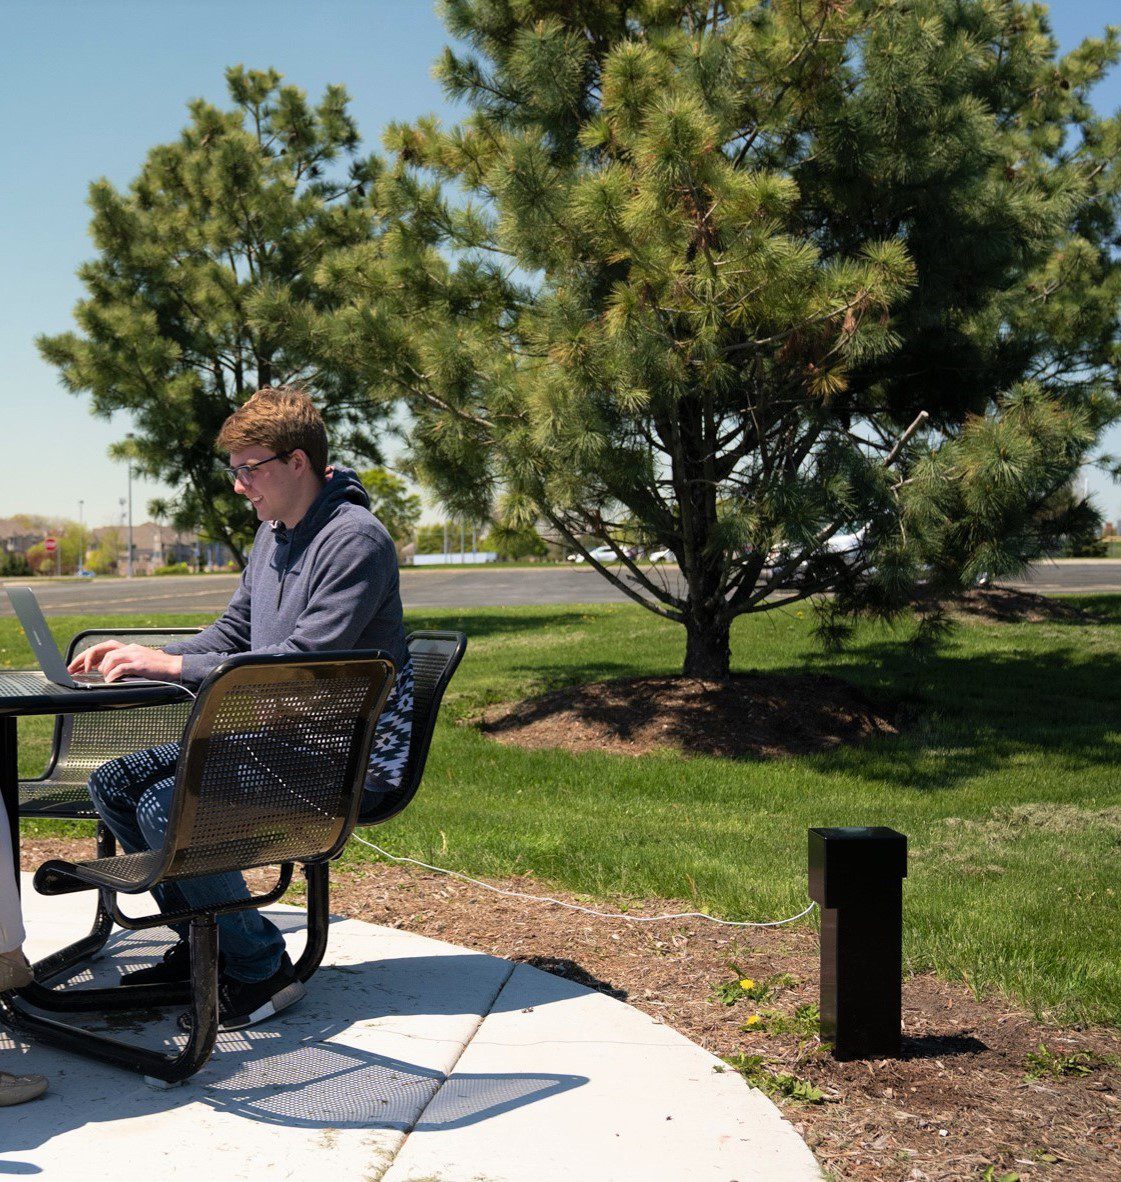 A person sitting at an outdoor table using a laptop while it's being charged with Pedoc power pedestal